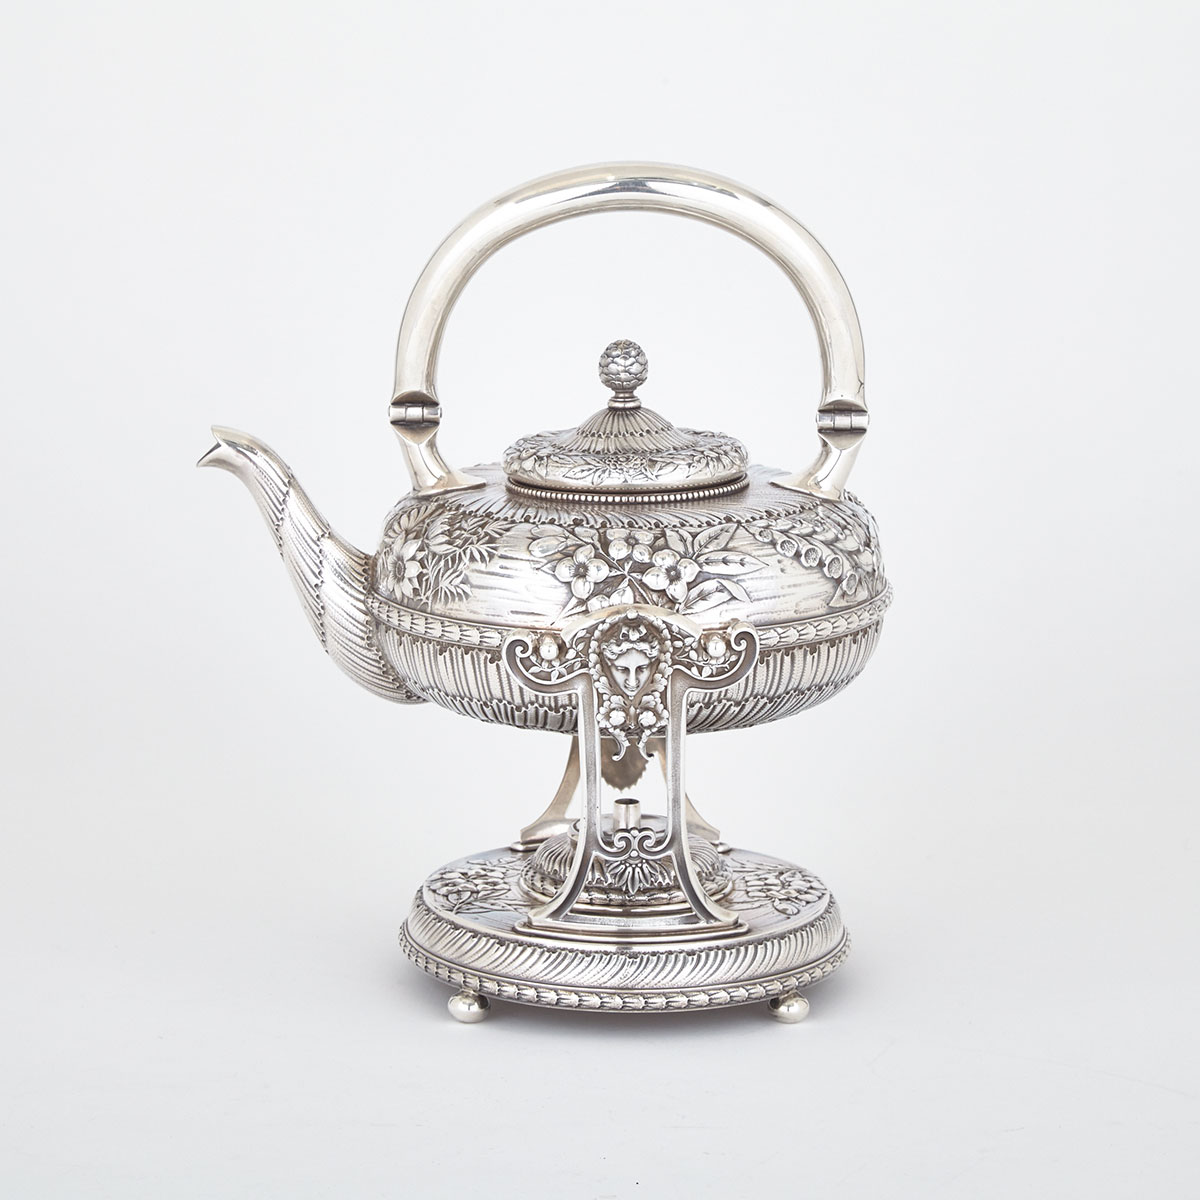 American Silver Tea Kettle on Lampstand, Gorham Mfg. Co., Providence, R.I., 1886/87